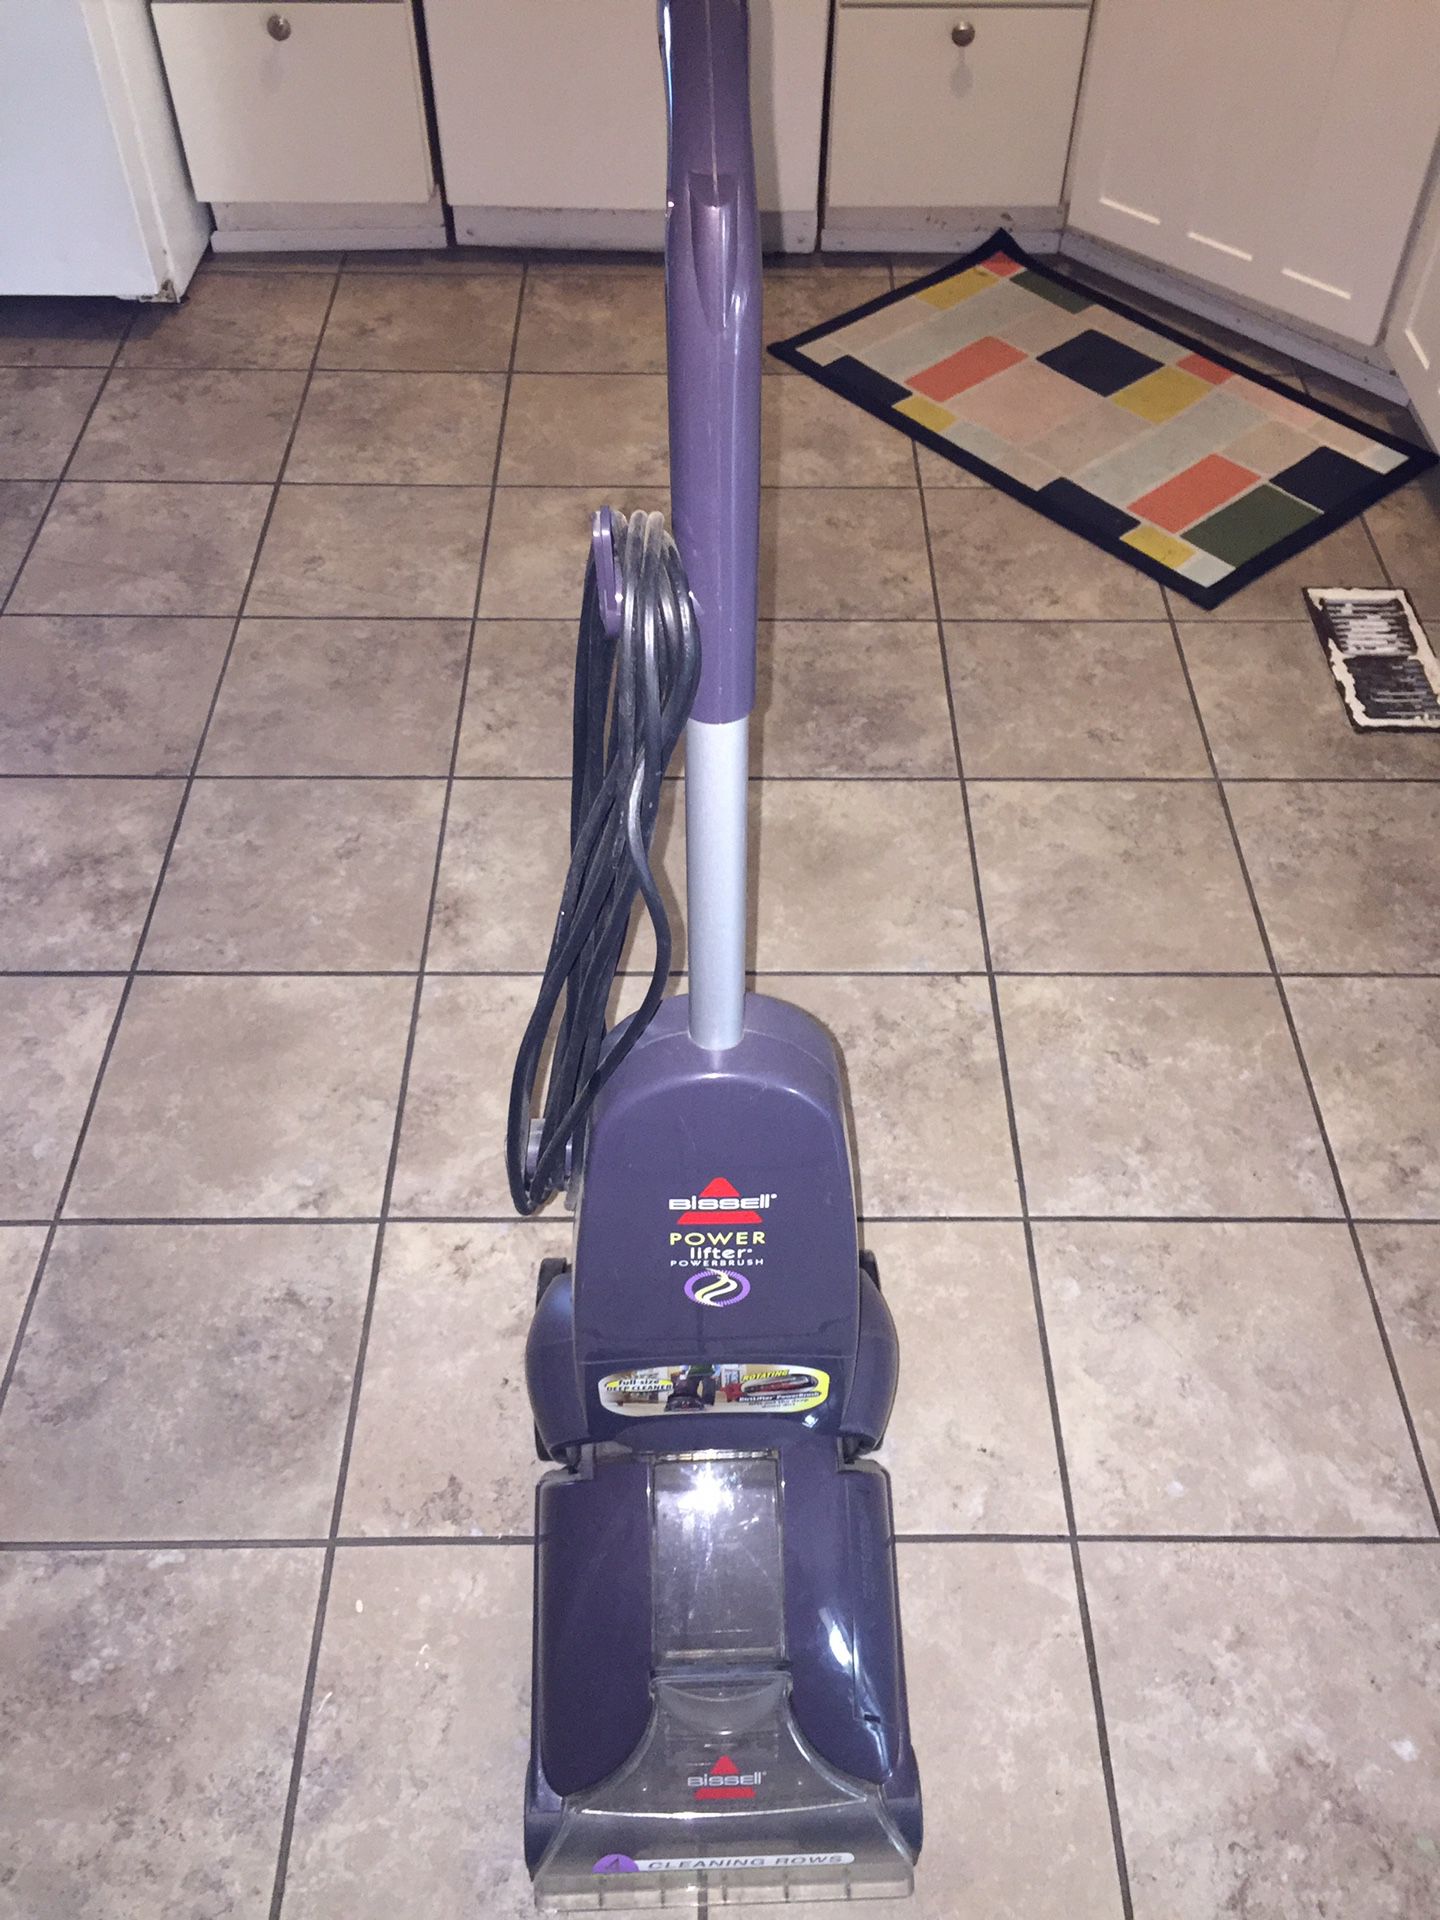 Bissell Powerlifter Powerbrush Upright Carpet Cleaner and Shampooer 1622